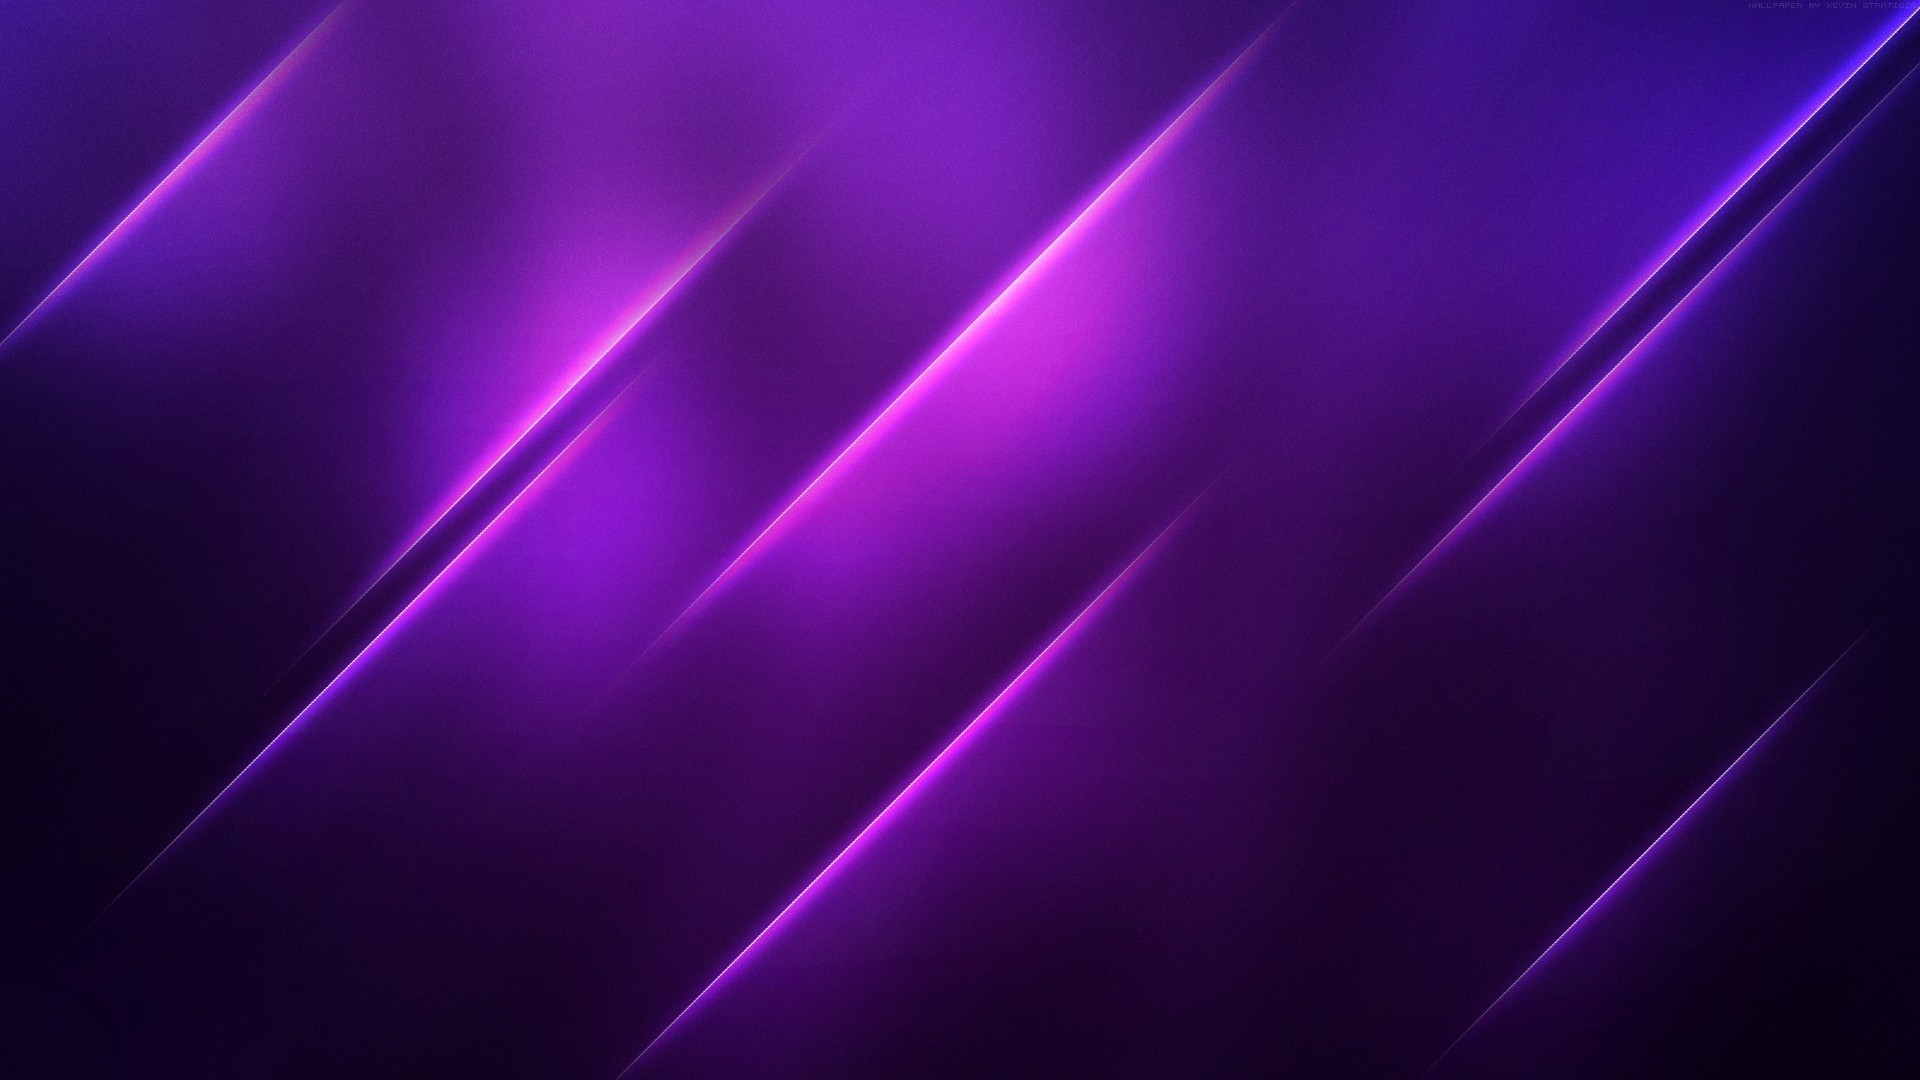 1920x1080 great simple x purple backgrounds wallpaper solid purple backgrounds hd  wallpaper download light purple pattern wallpapers with purple wallpaper  with light ...